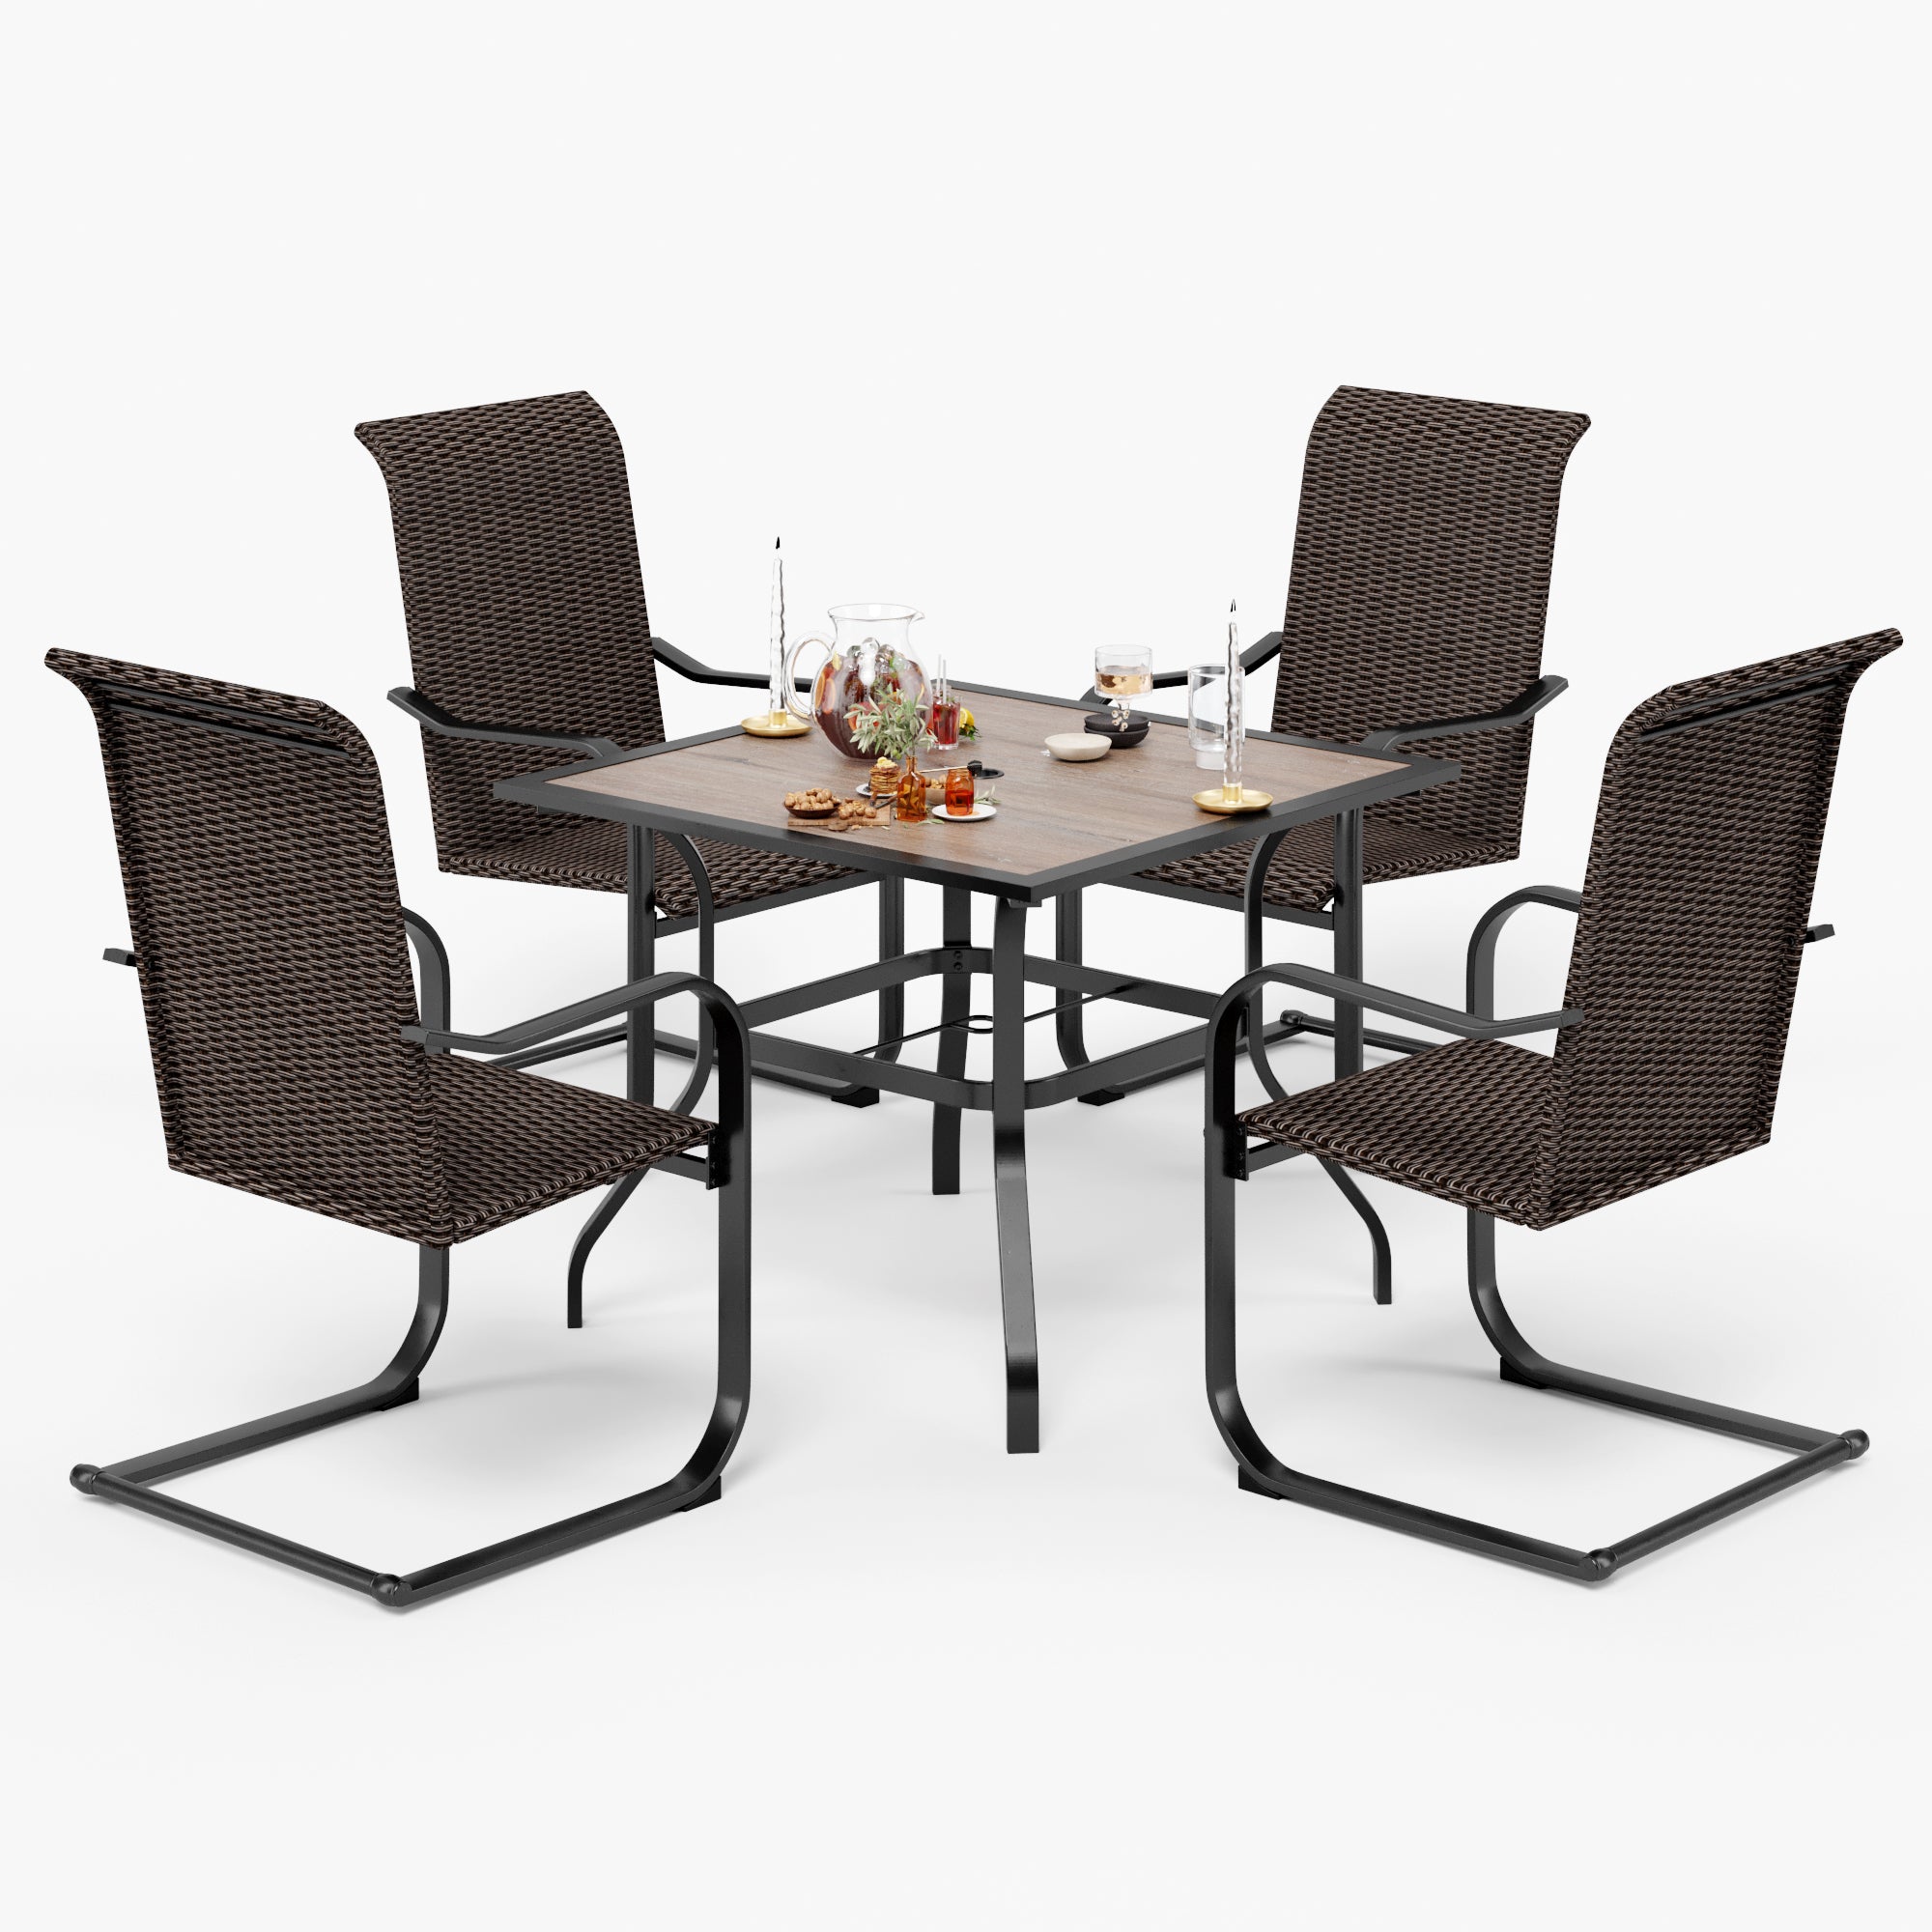 Sophia & William Wood-look Patio Table & 4 Rattan C-spring Chairs Outdoor Dining Set